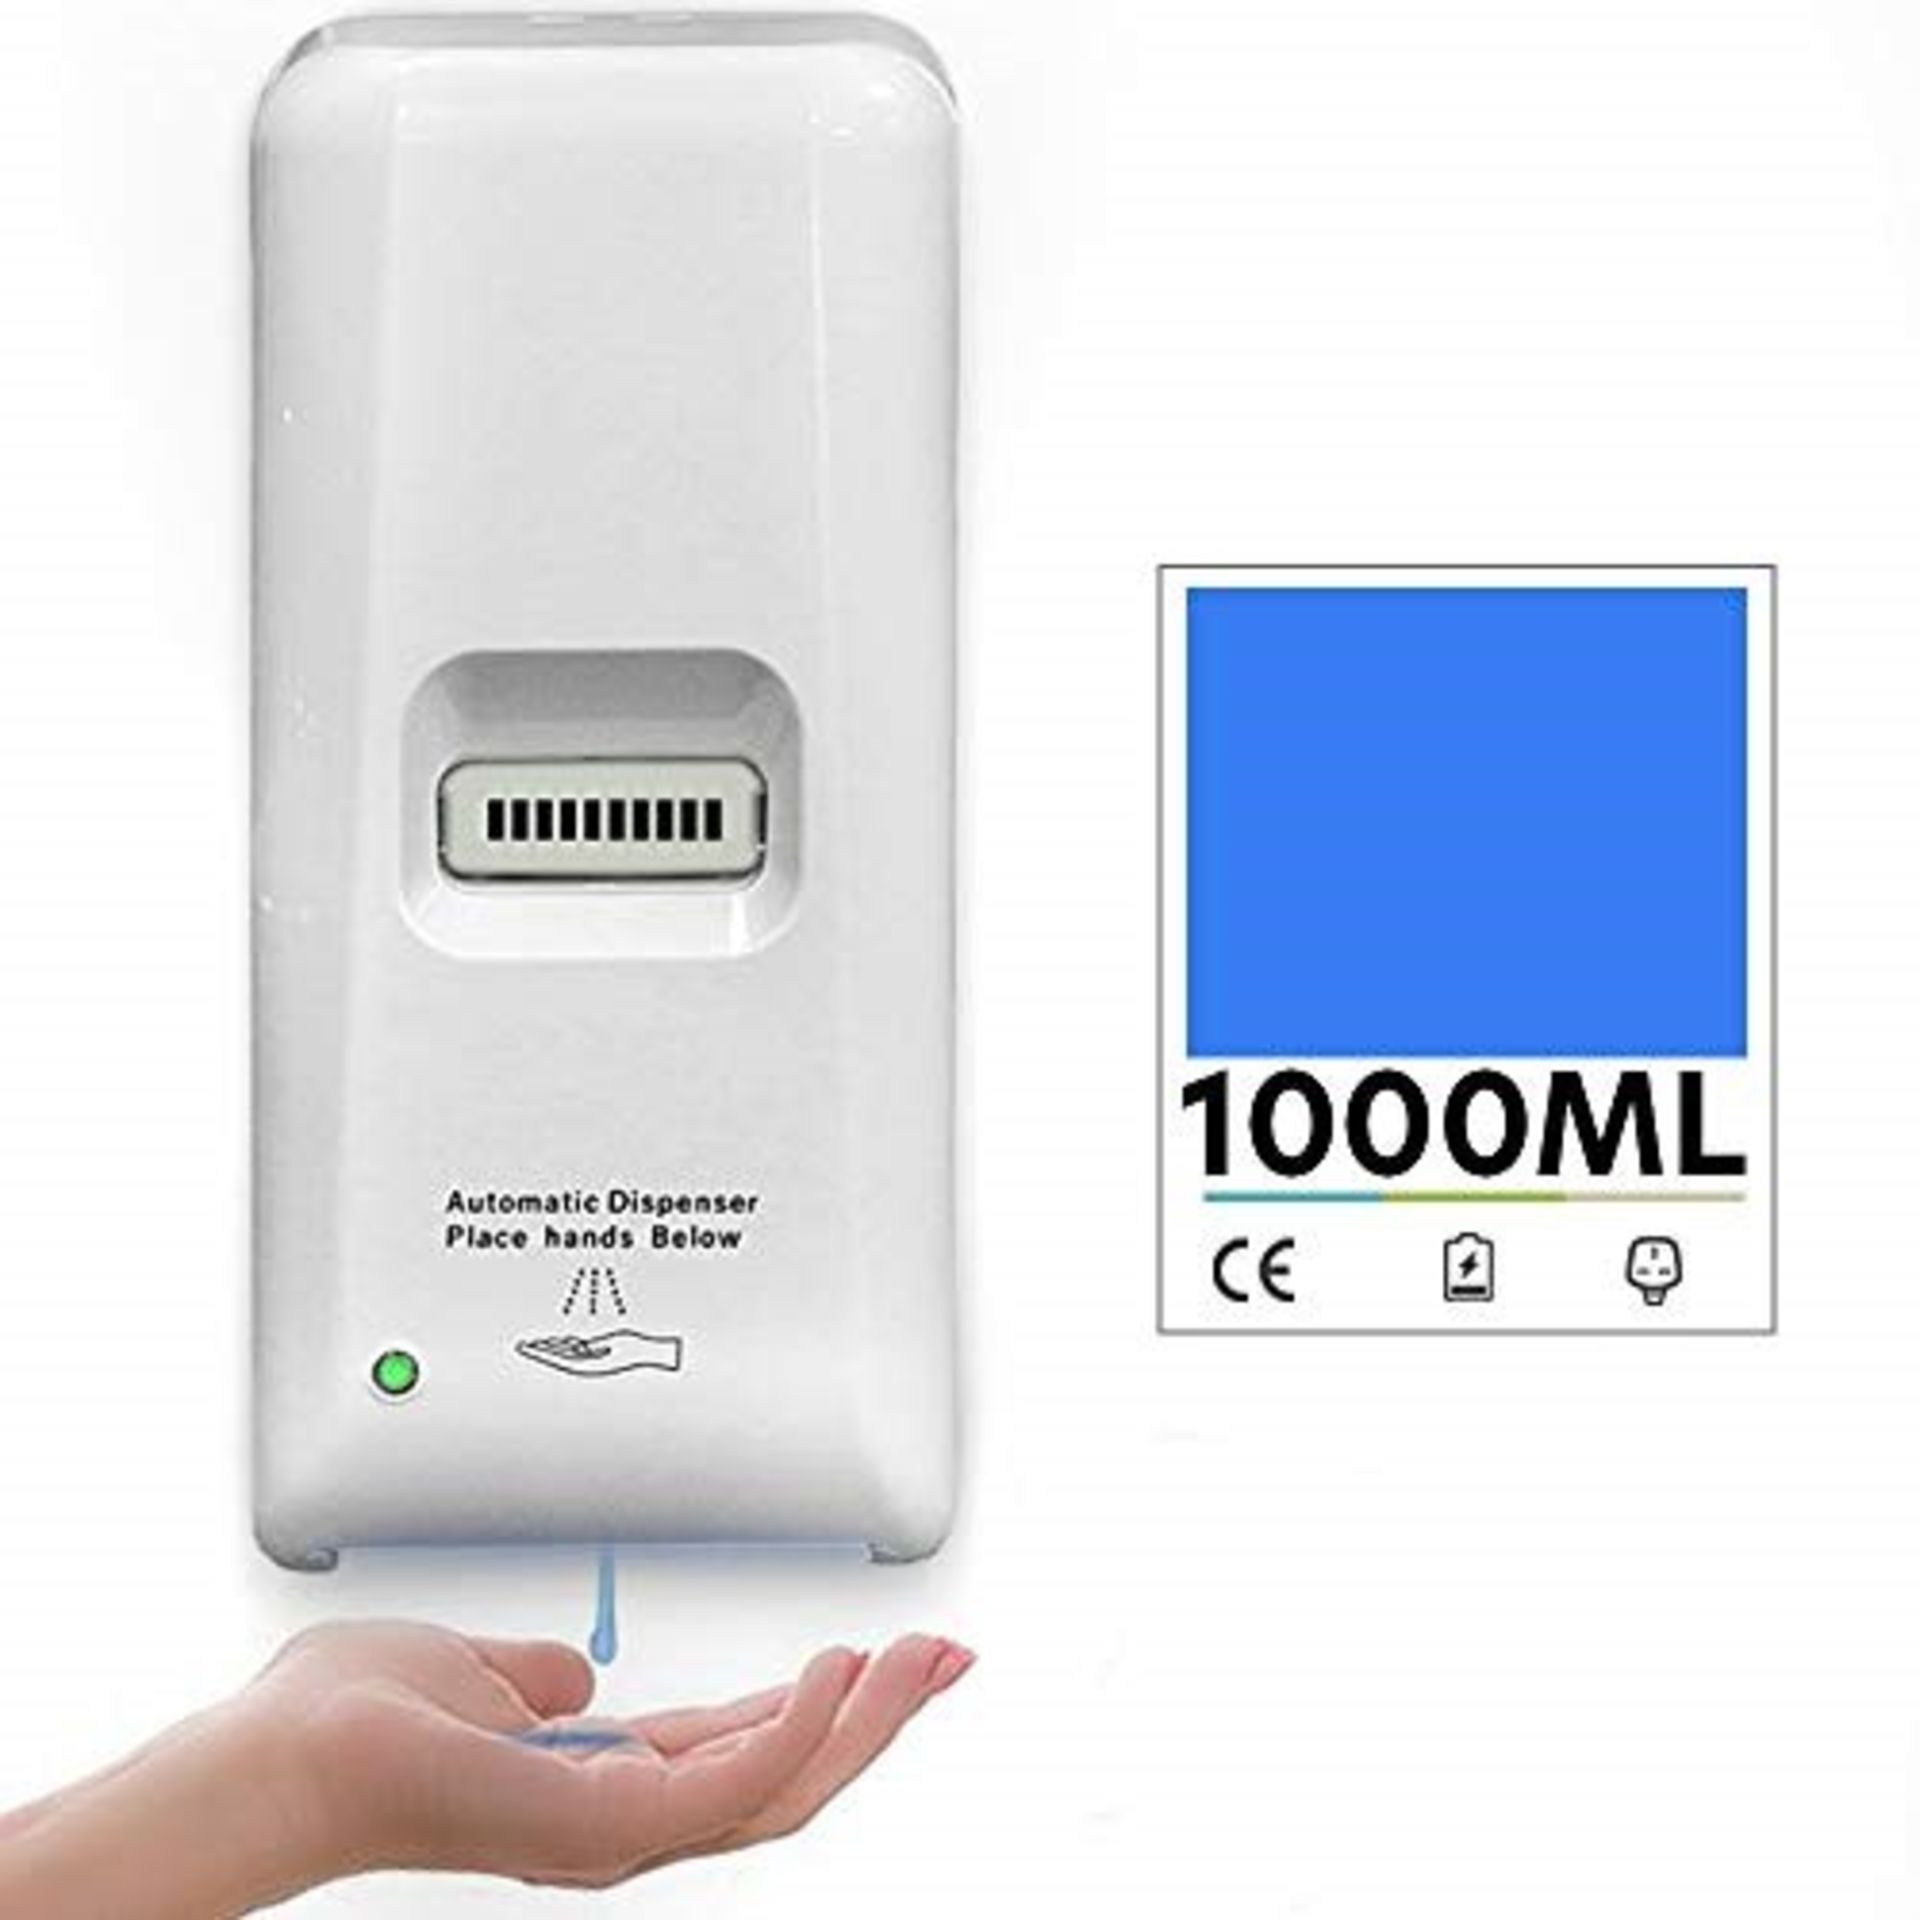 Professional Wall mount Automatic Hand Sanitizer Dispenser and Soap Dispenser with Bul